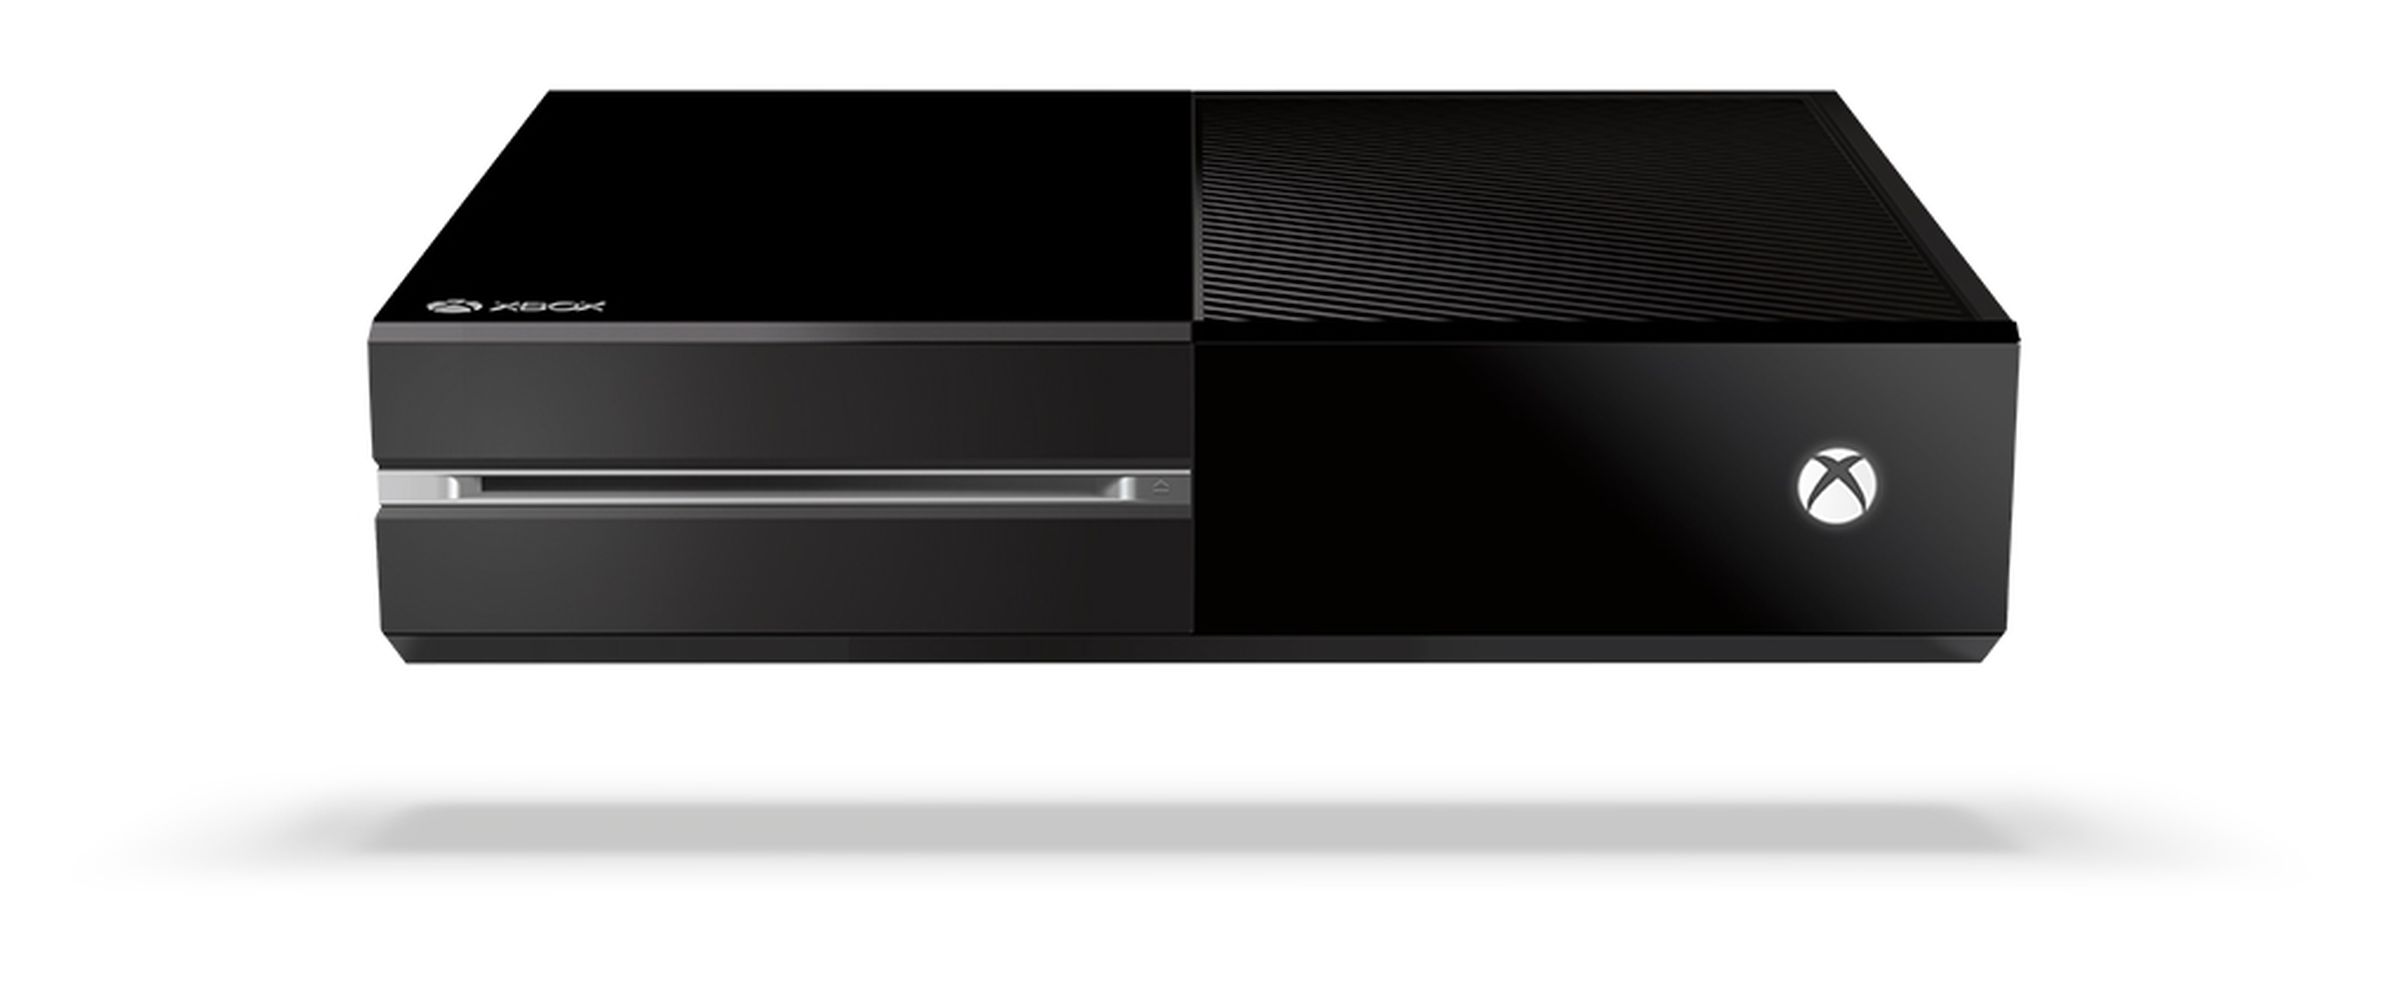 Xbox One hardware pictures